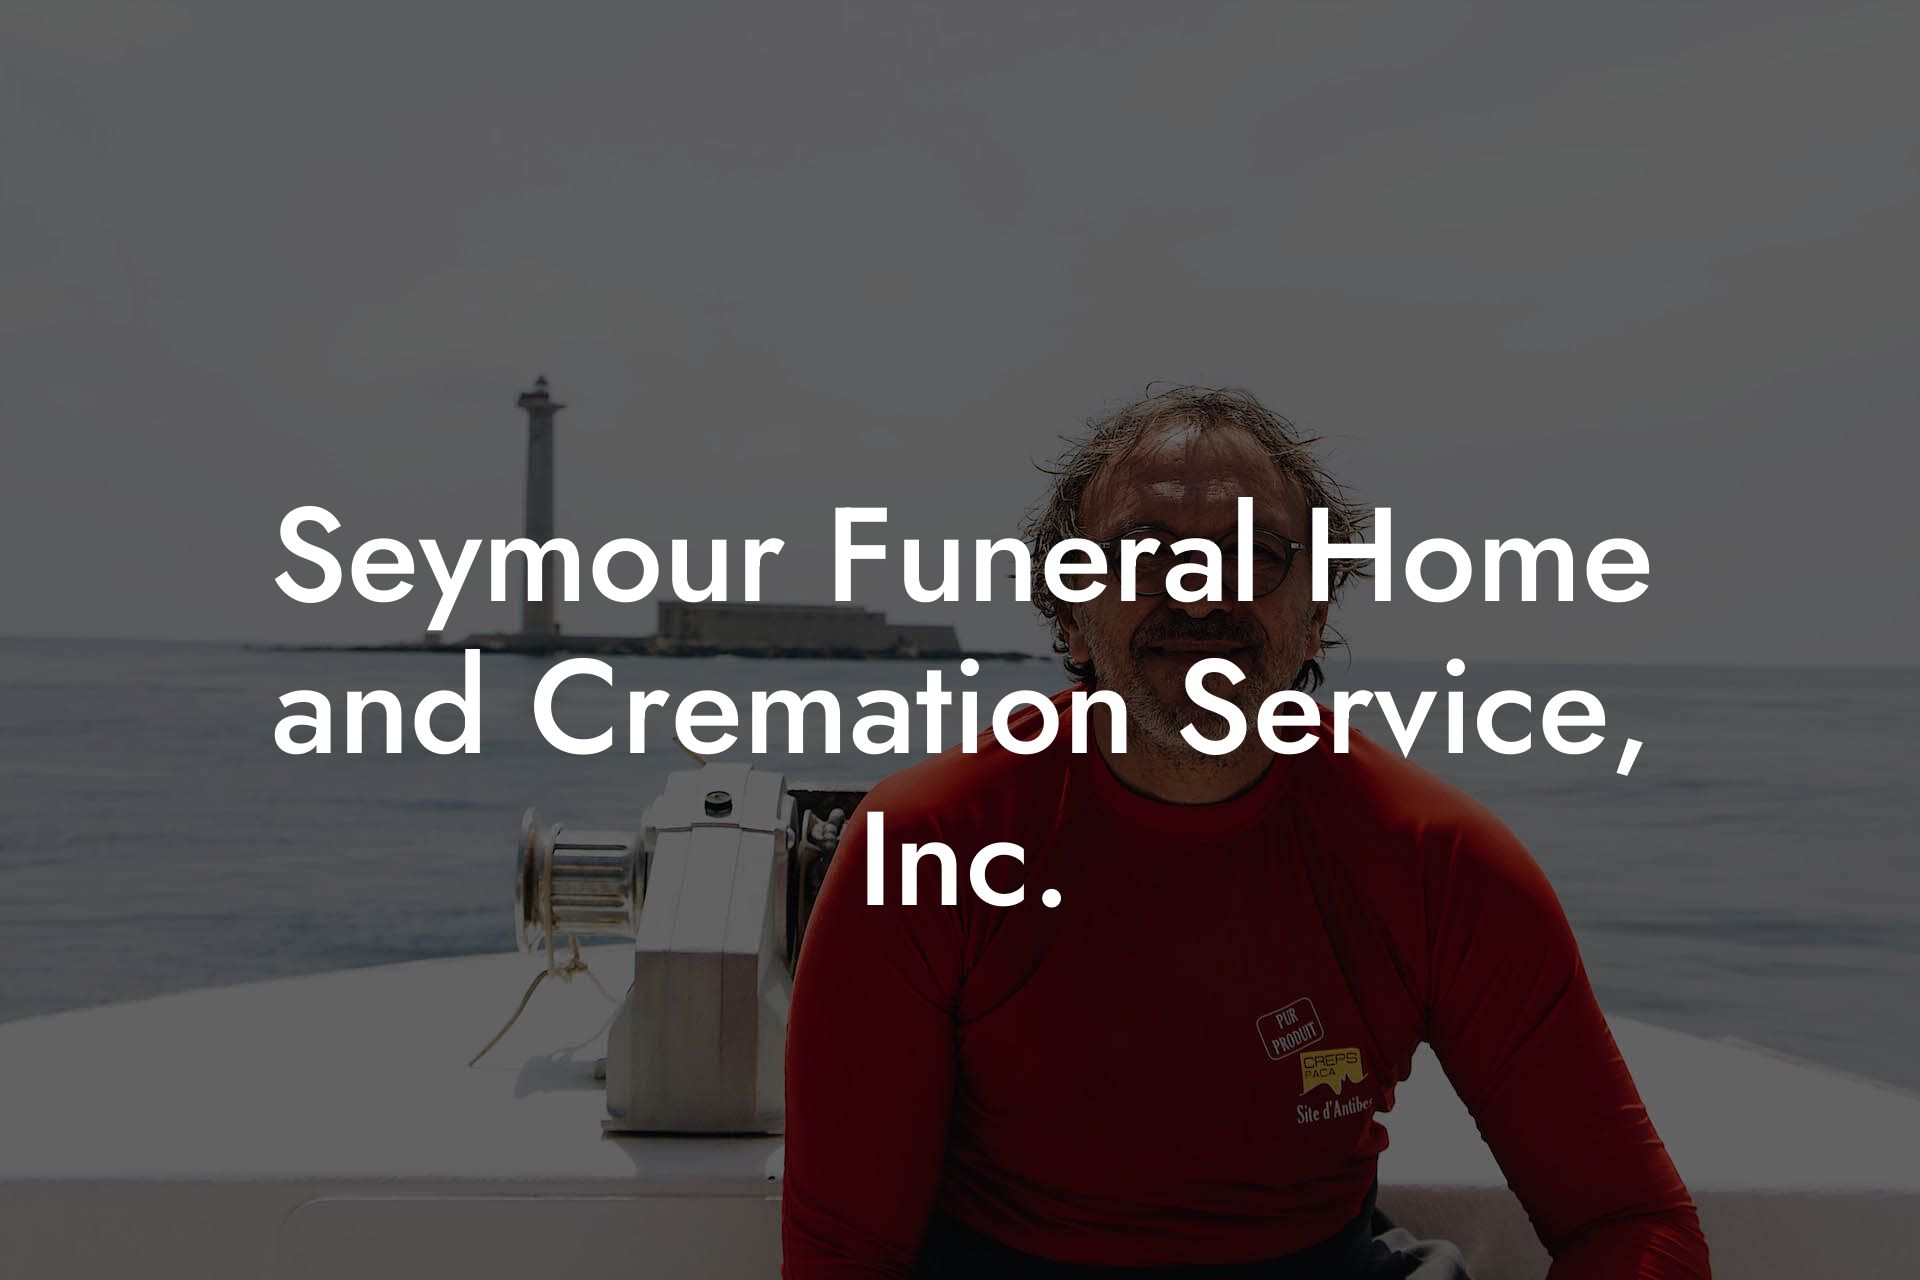 Seymour Funeral Home and Cremation Service, Inc.